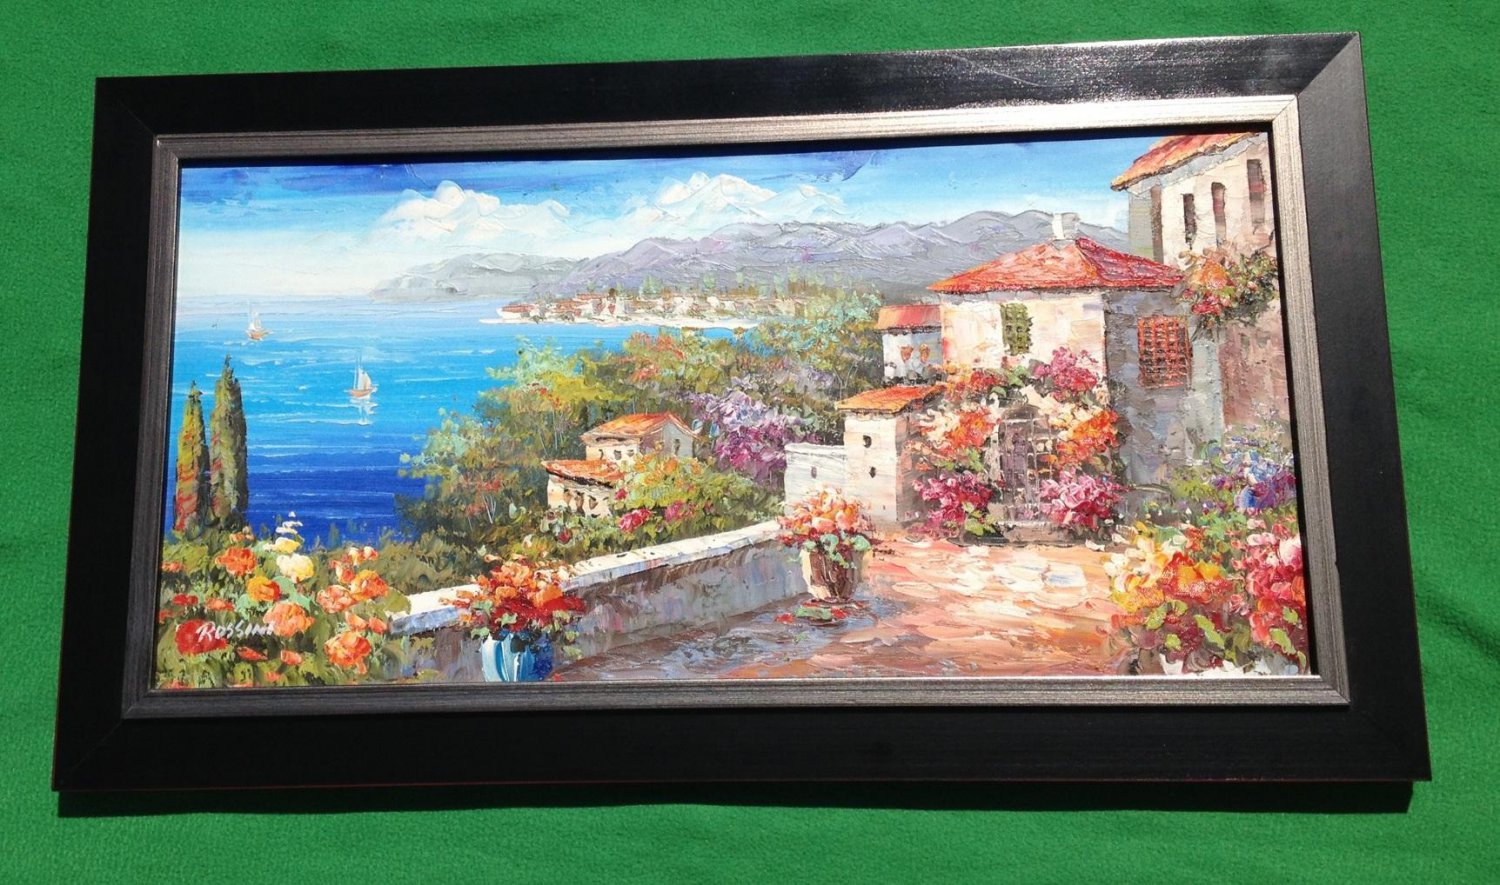 Oil Painting 27.5" Wide X 15.5" Tall by Listed Euro Artist Rossini Overlooking Seascape Italy